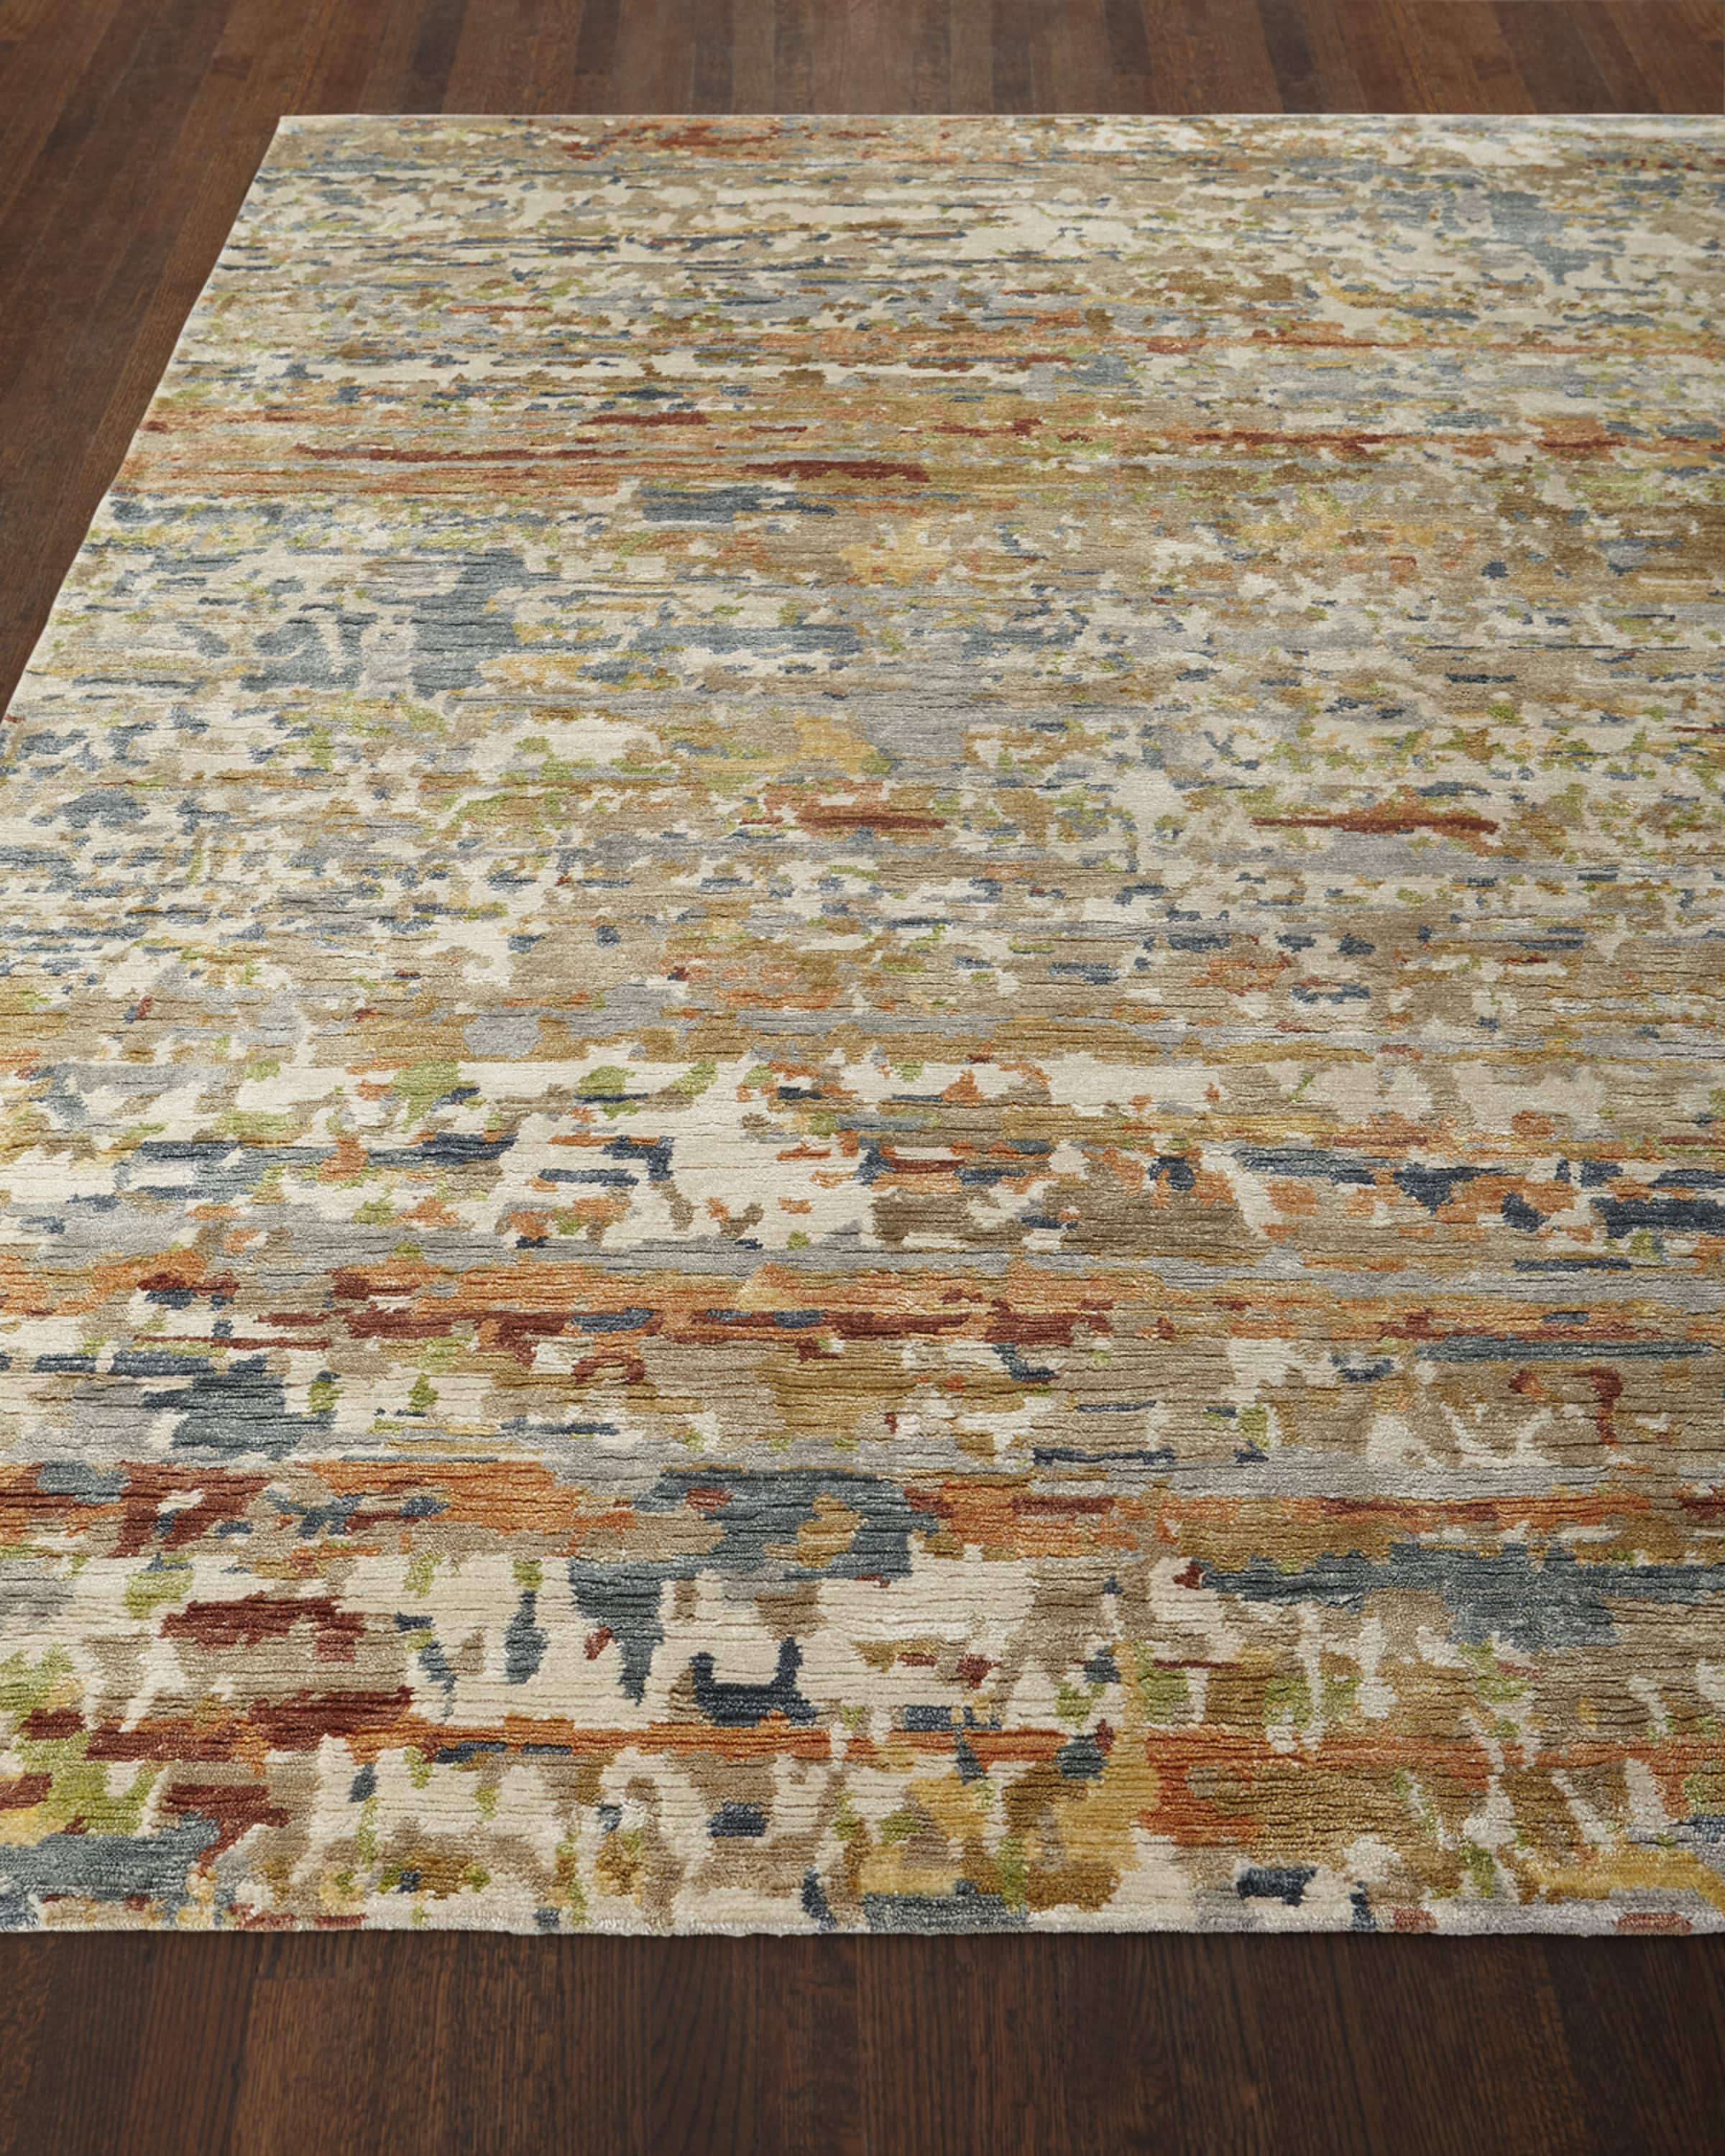 Jeffrey Hand-Knotted Area Rug, 6' x 9'